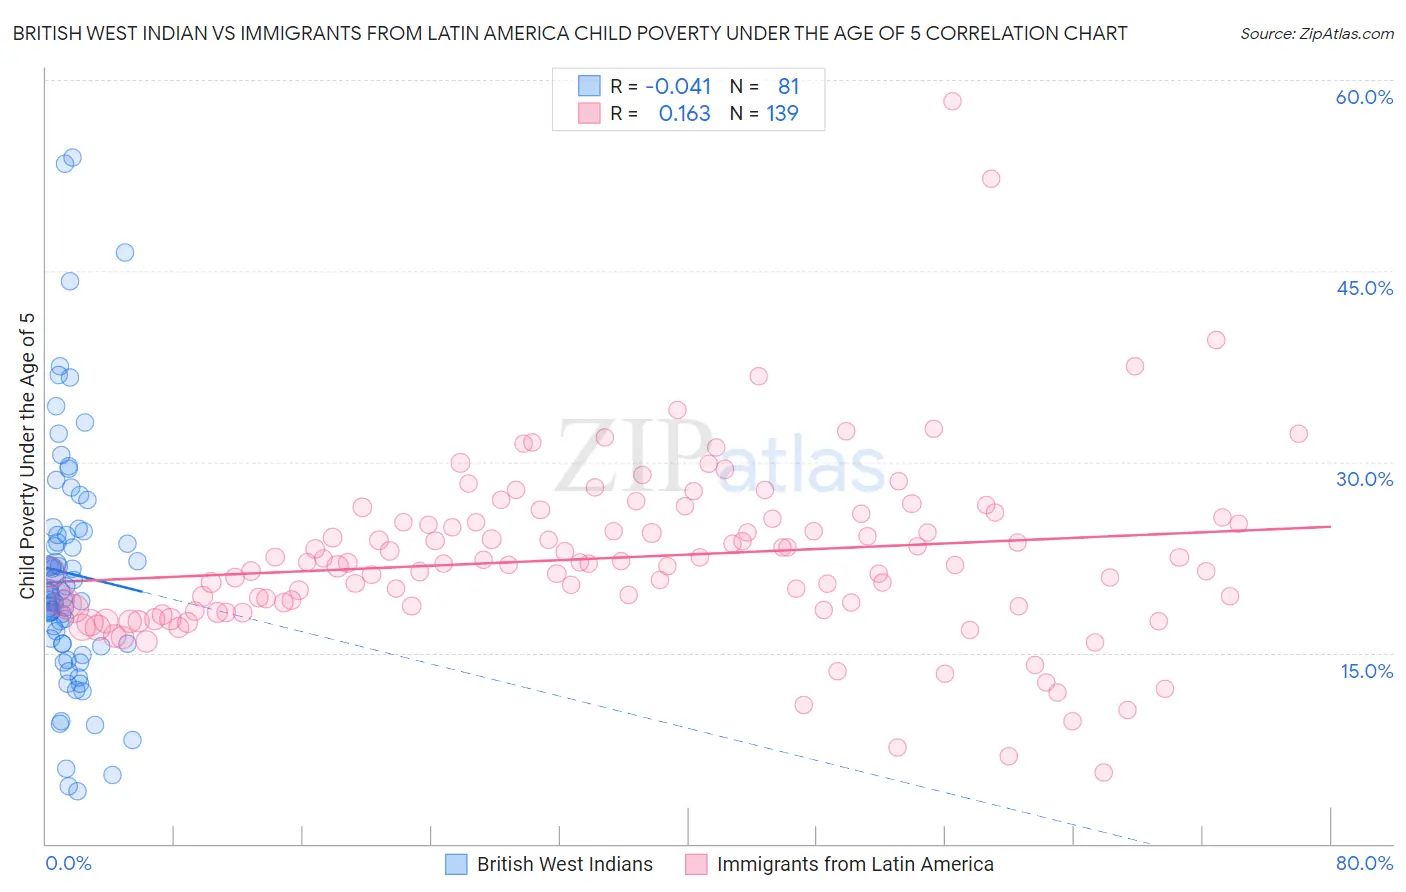 British West Indian vs Immigrants from Latin America Child Poverty Under the Age of 5